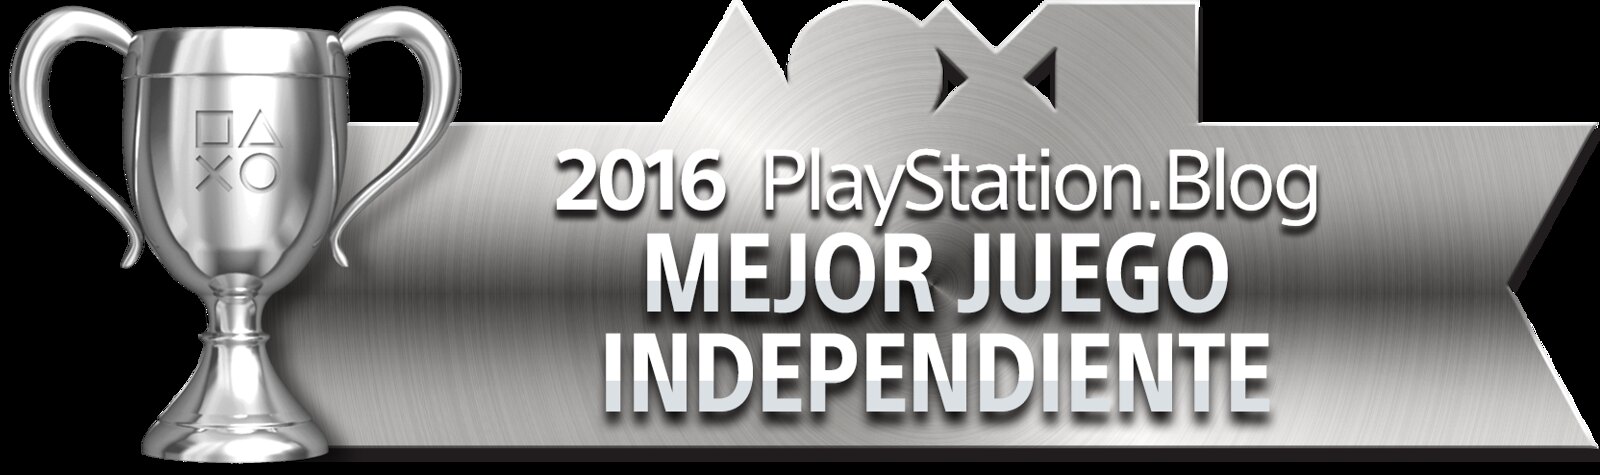 Best Independent Game - Silver